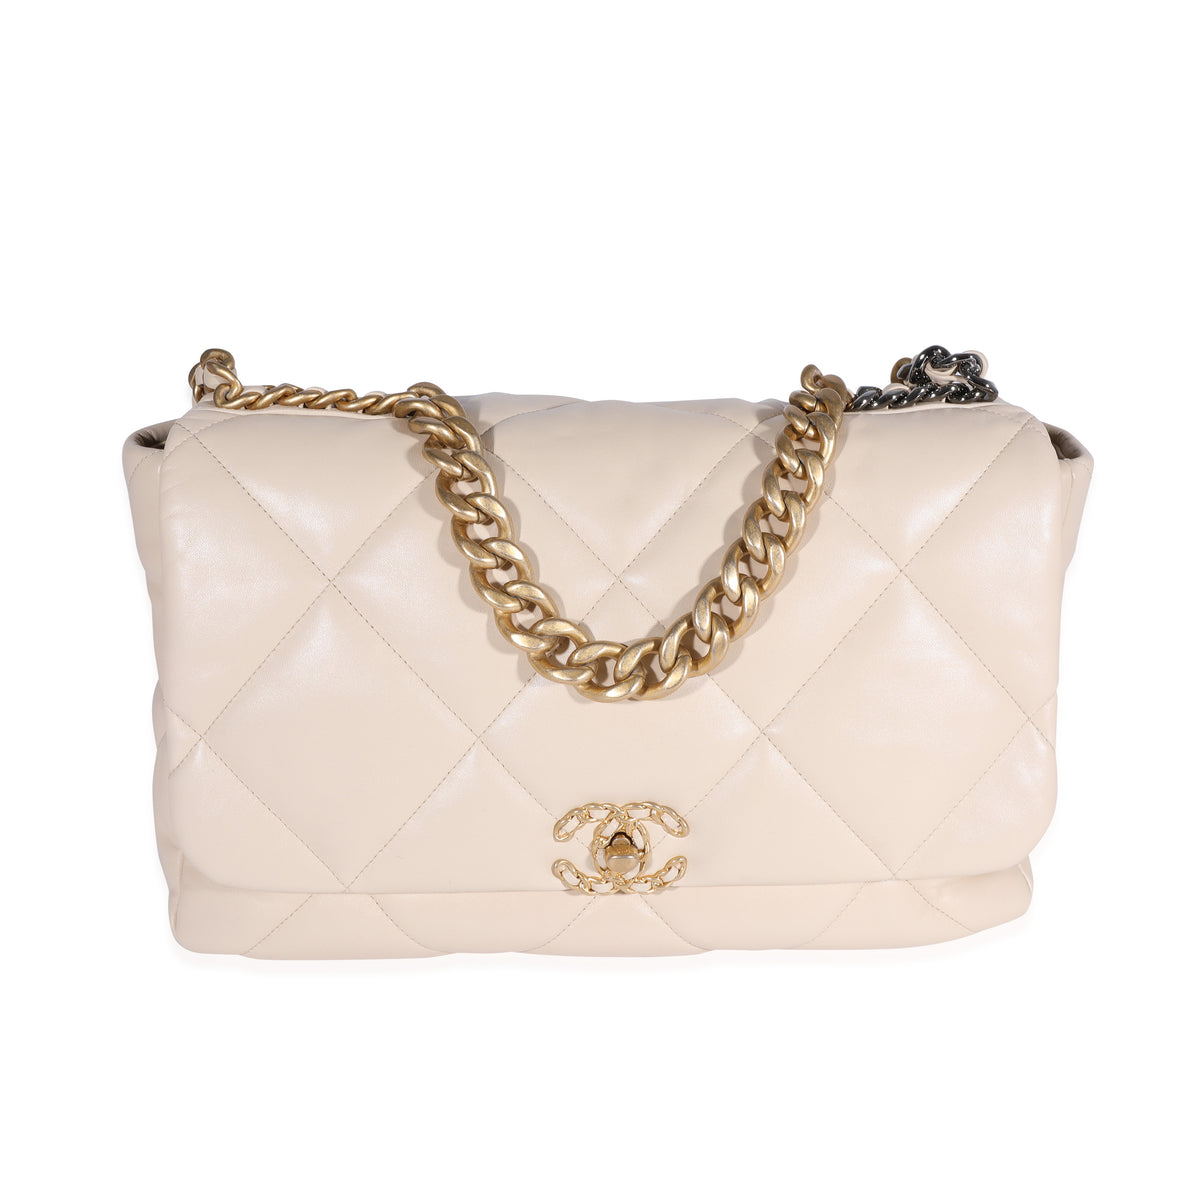 CHANEL Lambskin Quilted Large Chanel 19 Flap Beige 1228495